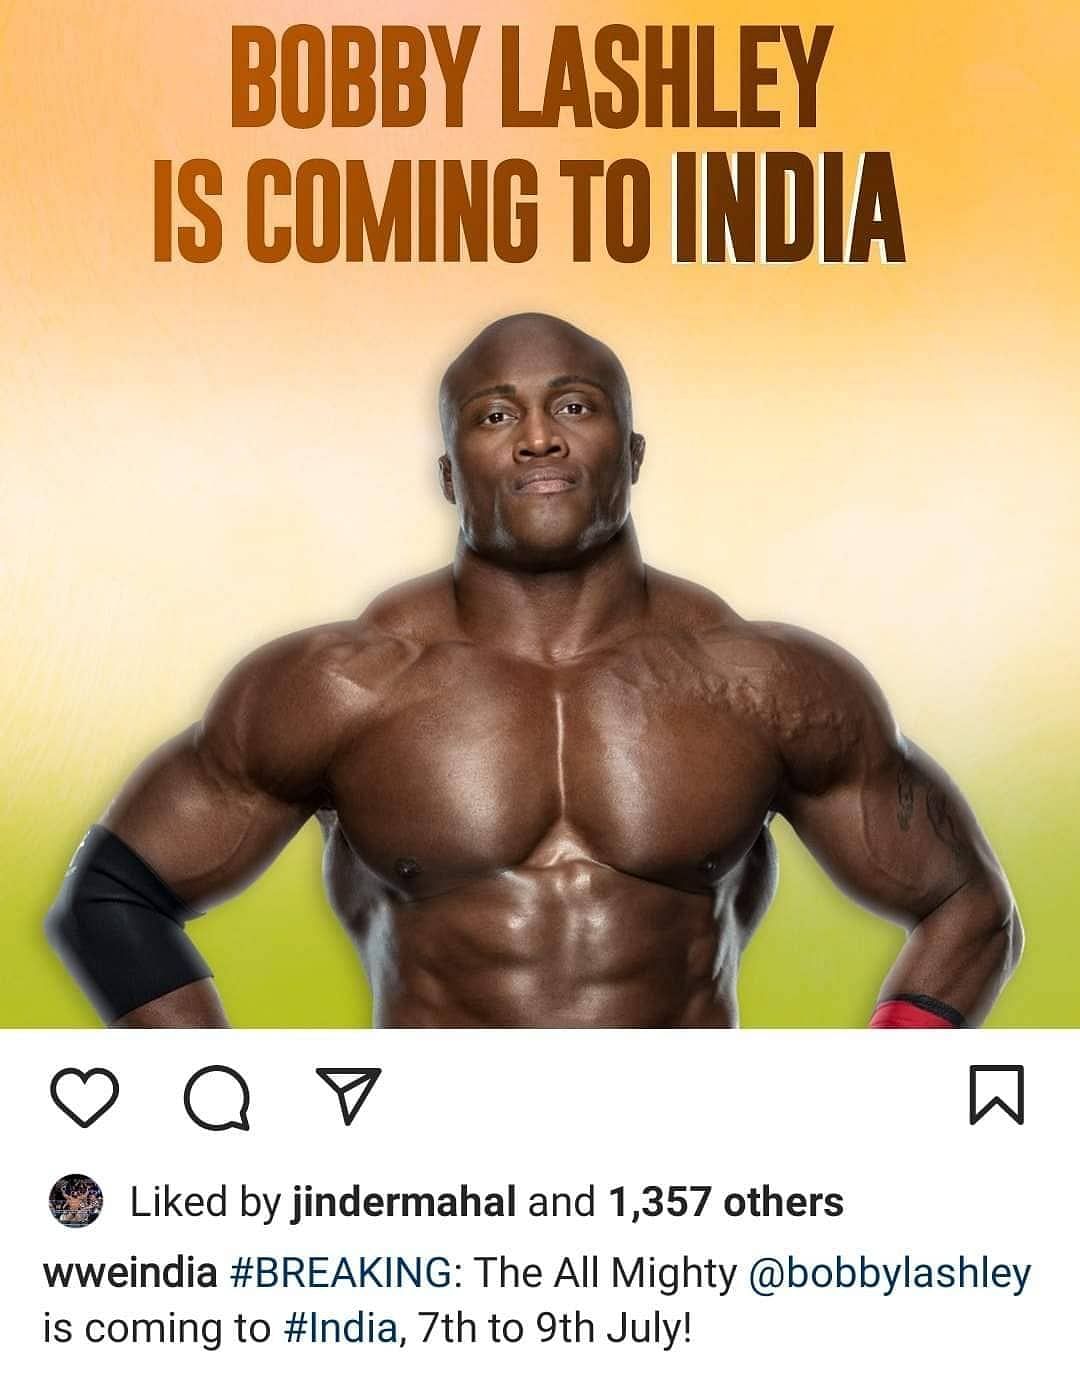 The deleted-post confirming Bobby Lashley&#039;s appearance in India!